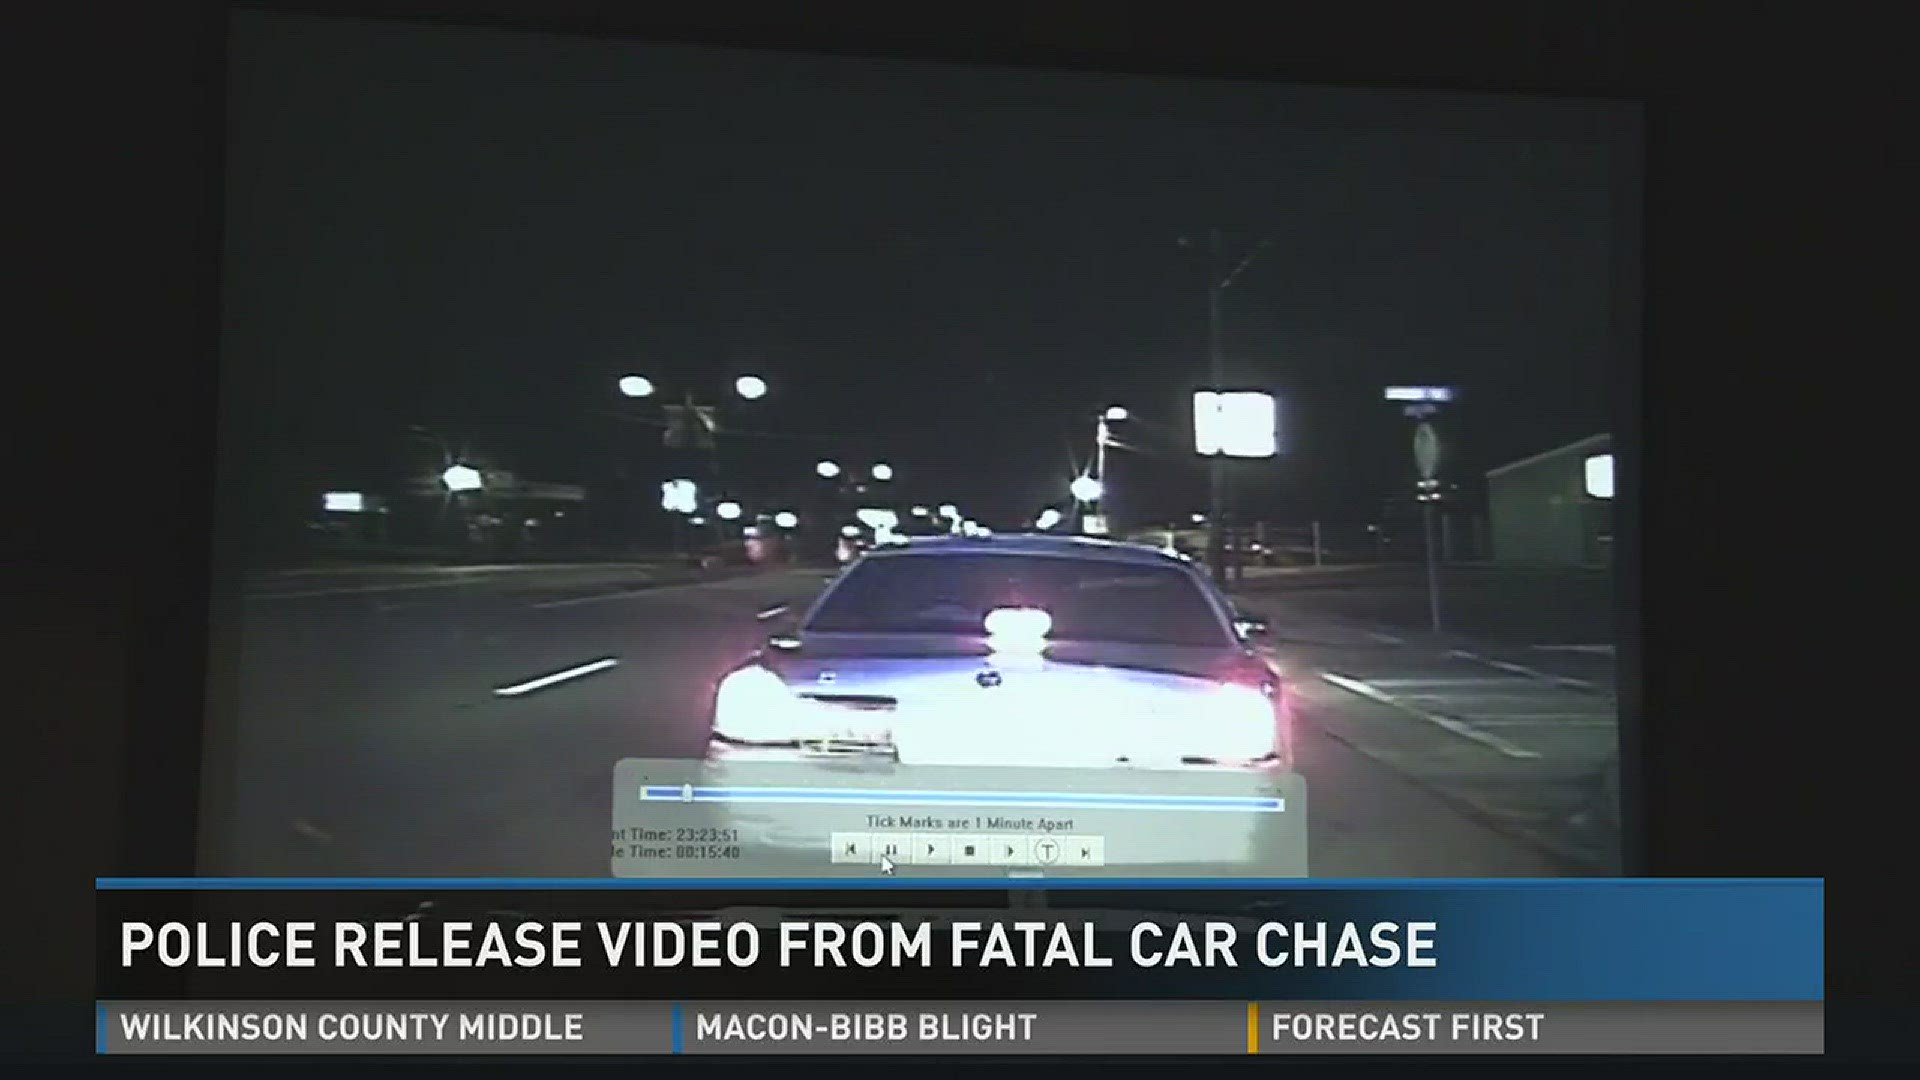 WATCH: Dashcam video released from fatal Perry high chase